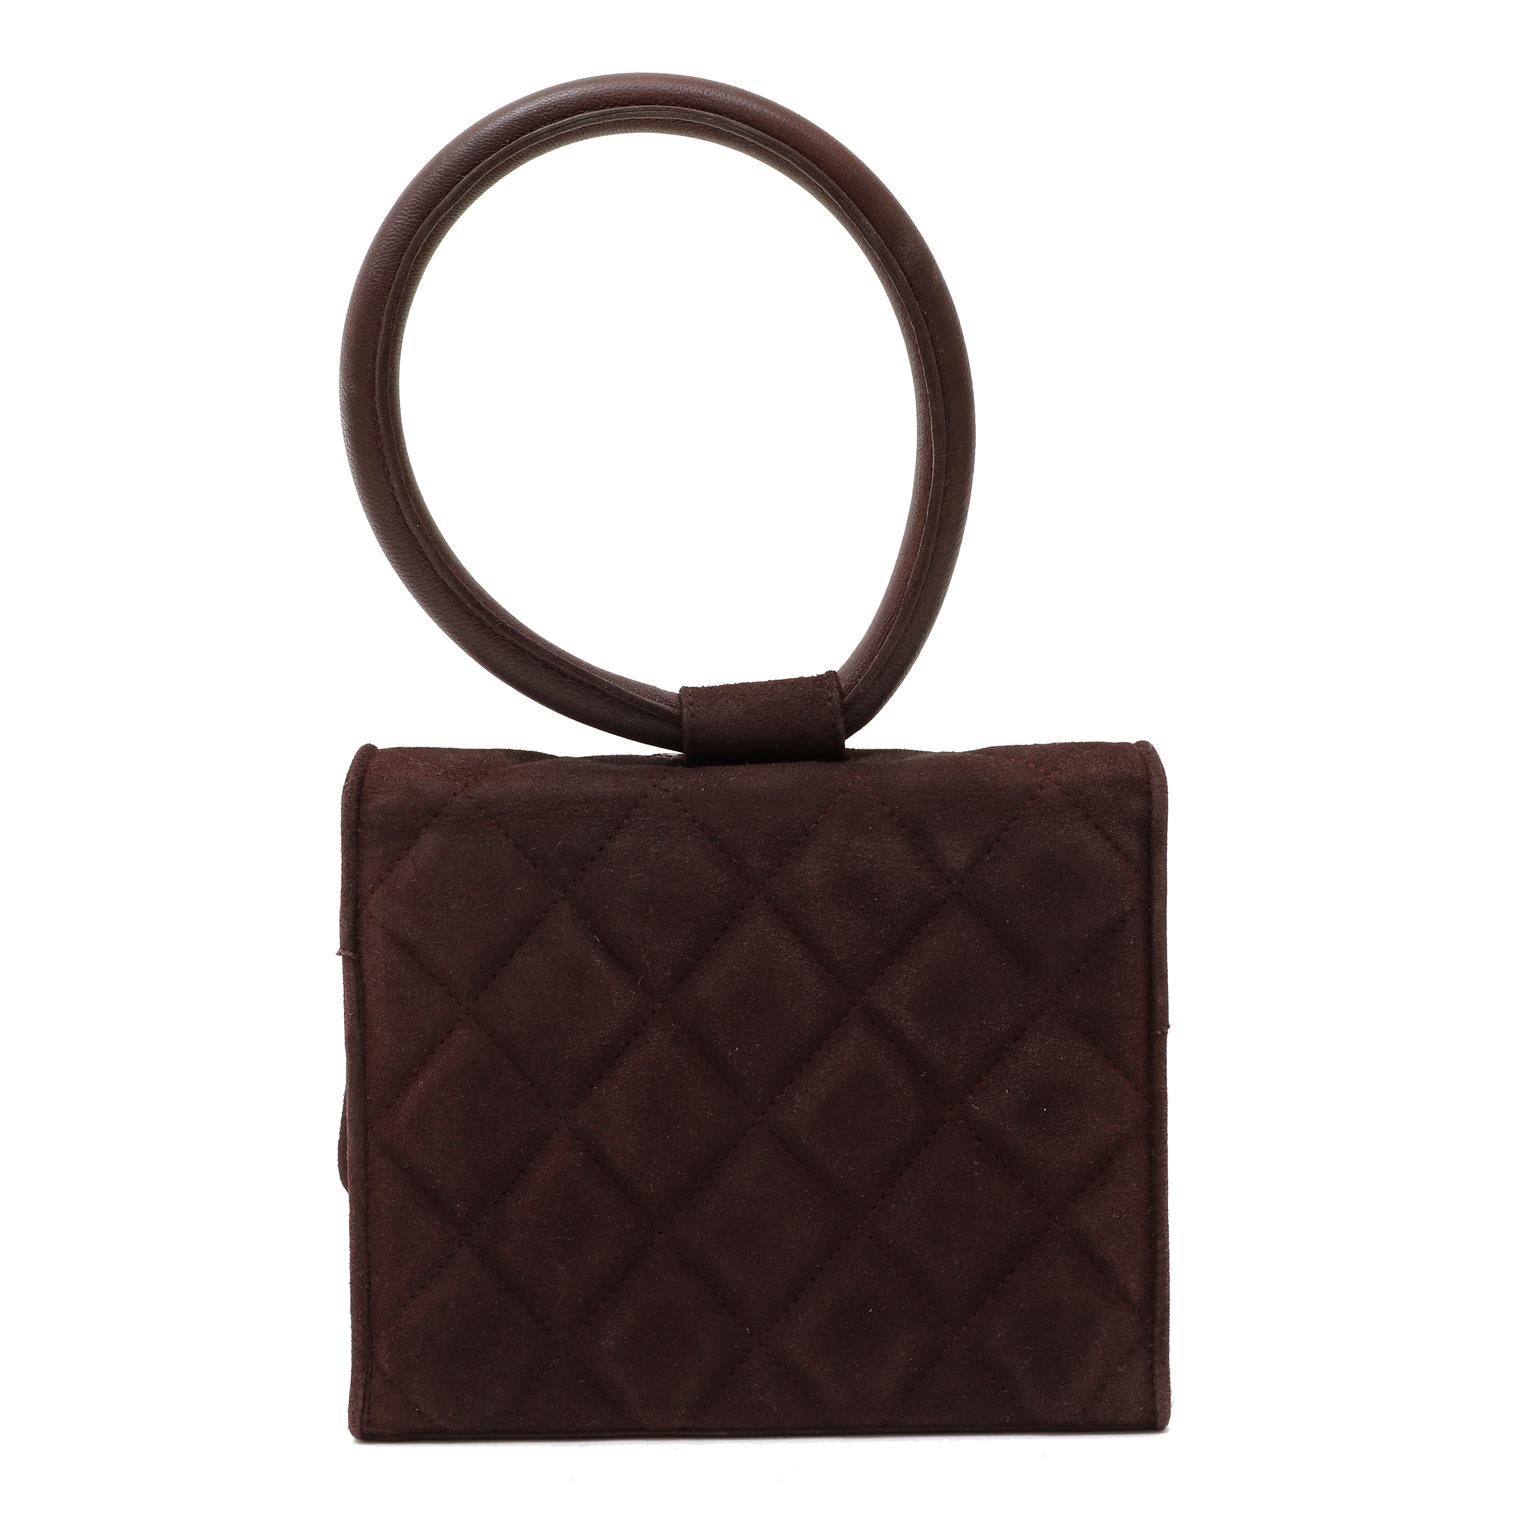 This authentic Chanel Dark Brown Suede Gripoix Jewels Evening Bag is in mint condition. A very rare piece featuring an iconic Chanel Gripoix flower design that is a must have for any collector.
Deep wine suede is quilted in signature Chanel diamond